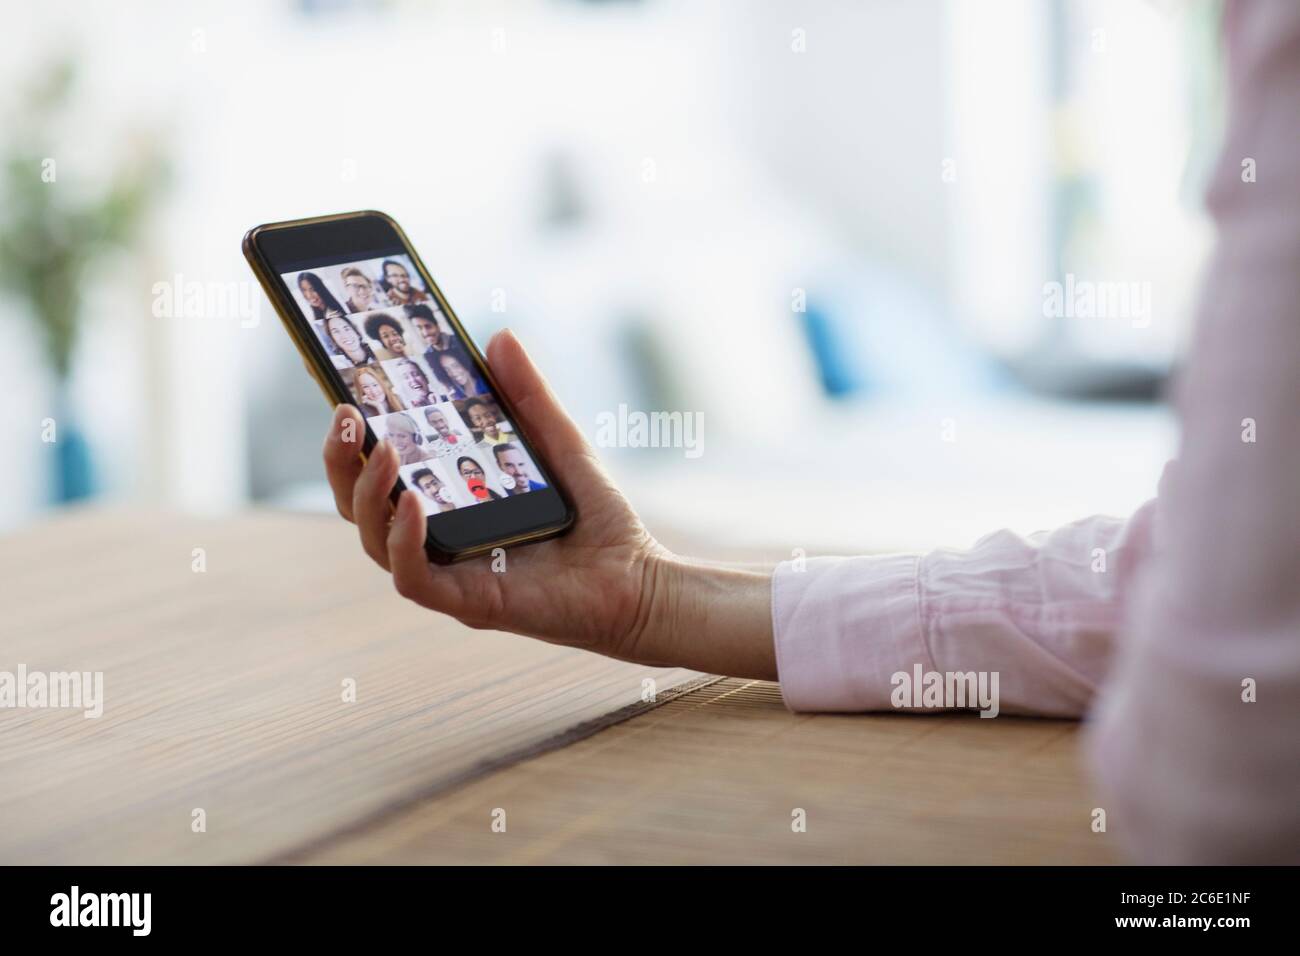 Friends video chatting on smart phone screen Stock Photo